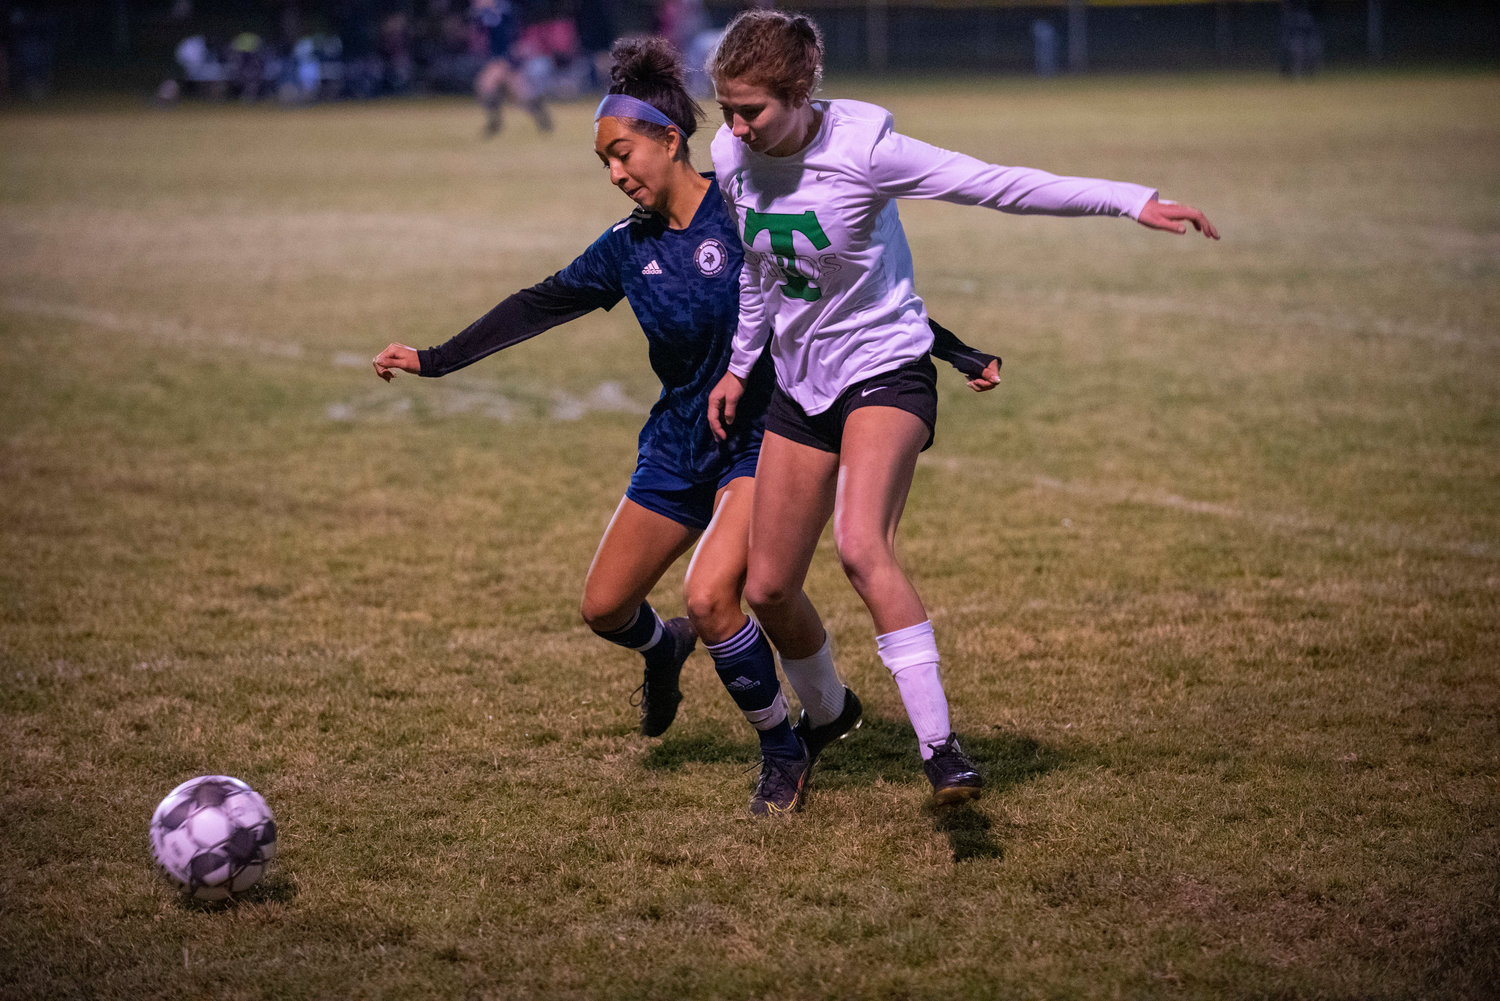 Tumwater’s Emalyn Shaffer (1) battles with a Selah player during a 2A state opener Wednesday in Selah.